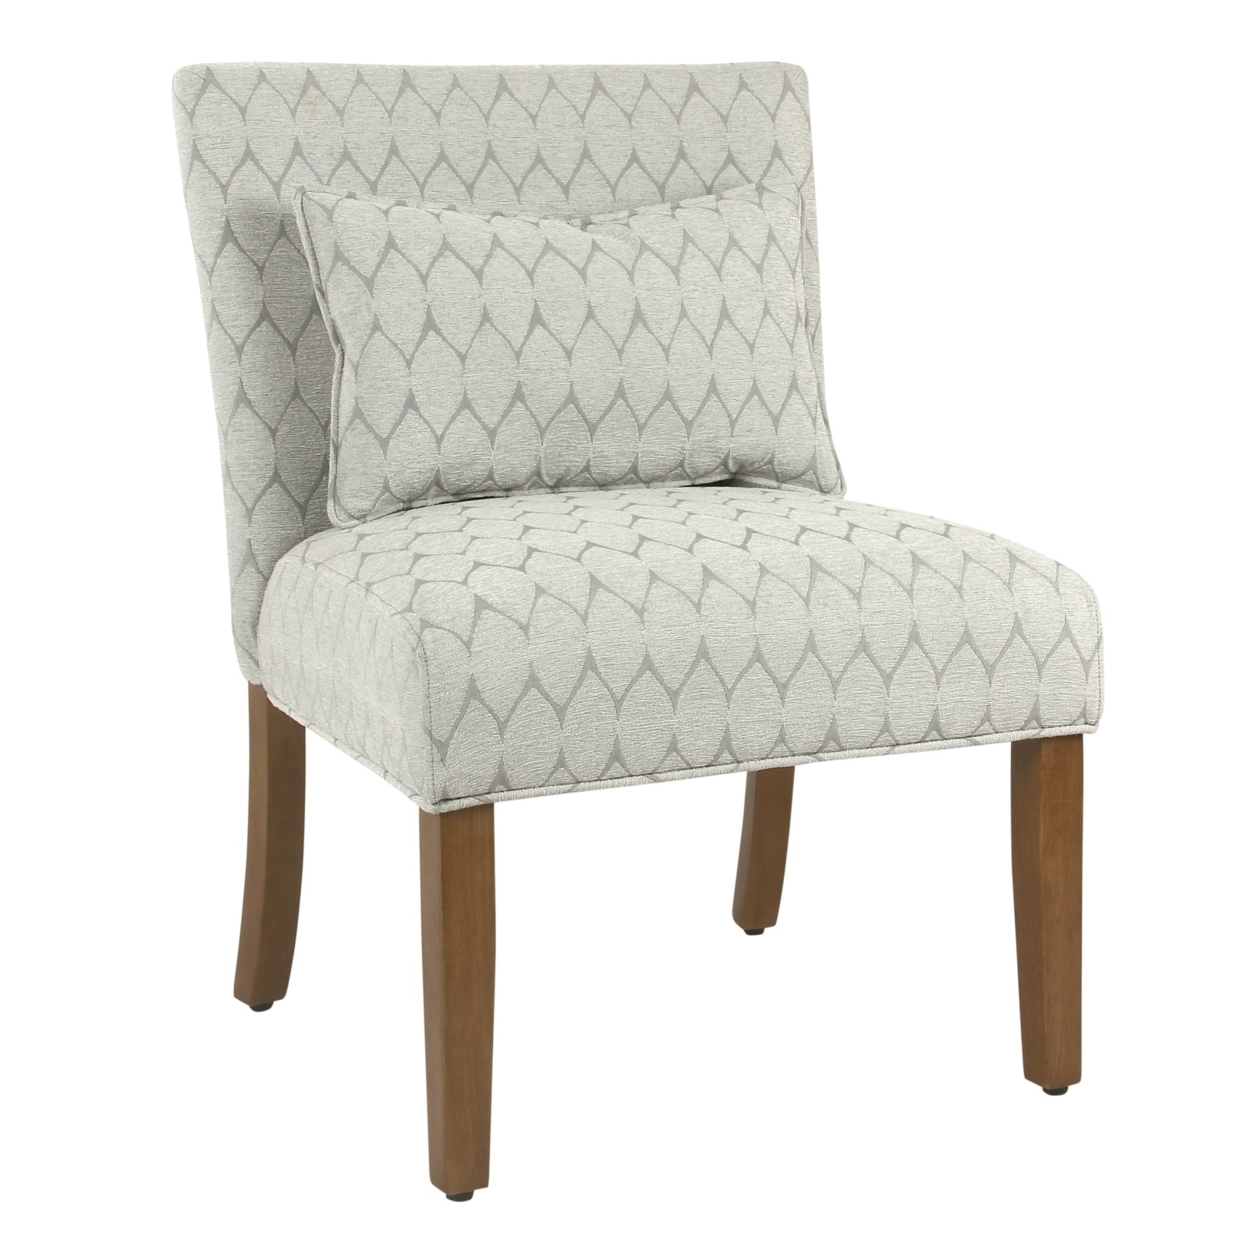 Fabric Upholstered Wooden Accent Chair With Printed Medallion Pattern, Brown And Gray- Saltoro Sherpi